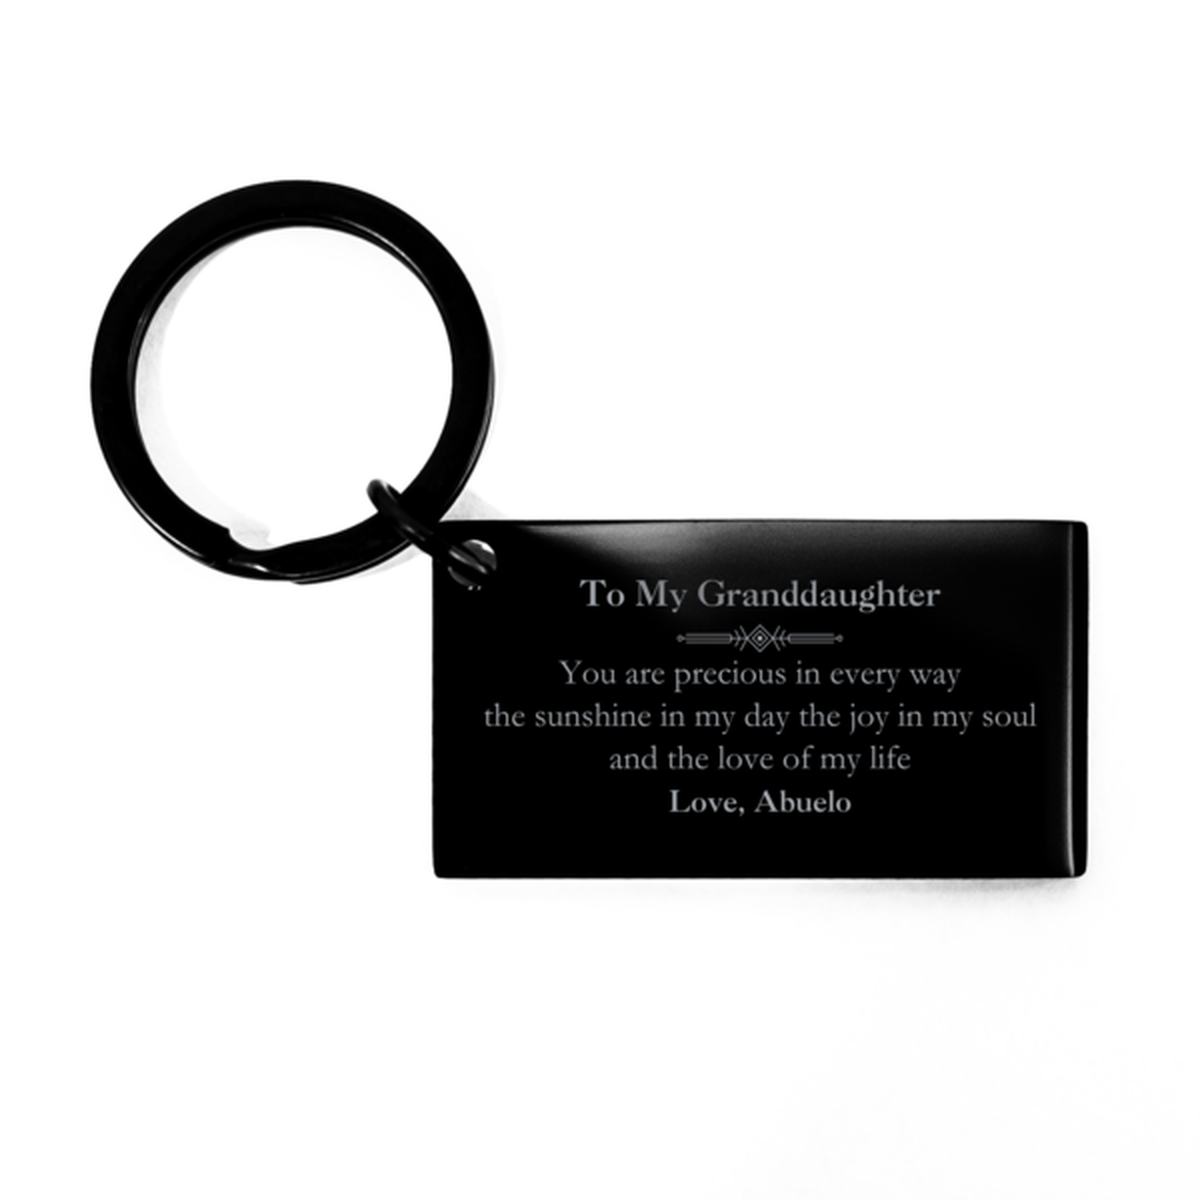 Graduation Gifts for Granddaughter Keychain Present from Abuelo, Christmas Granddaughter Birthday Gifts Granddaughter You are precious in every way the sunshine in my day. Love, Abuelo